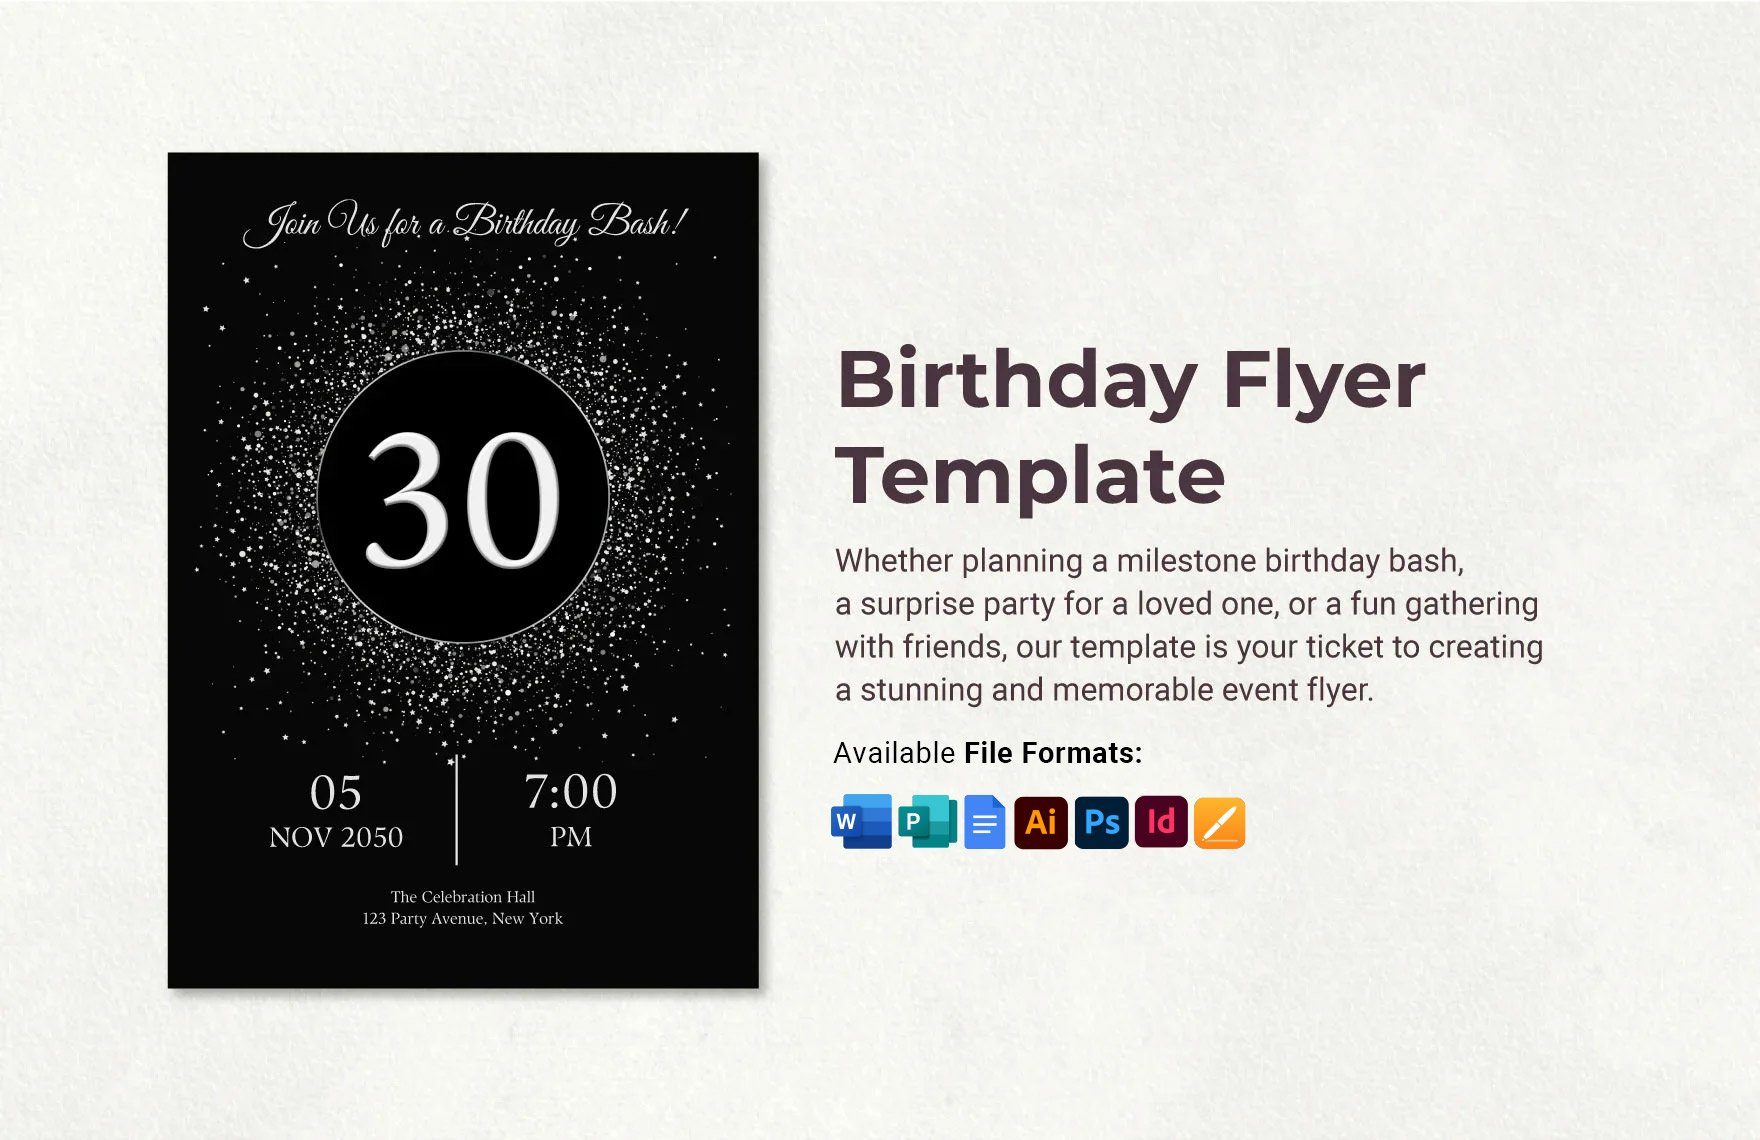 Free Birthday Flyer Template in Word, Google Docs, Illustrator, PSD, Apple Pages, Publisher, InDesign